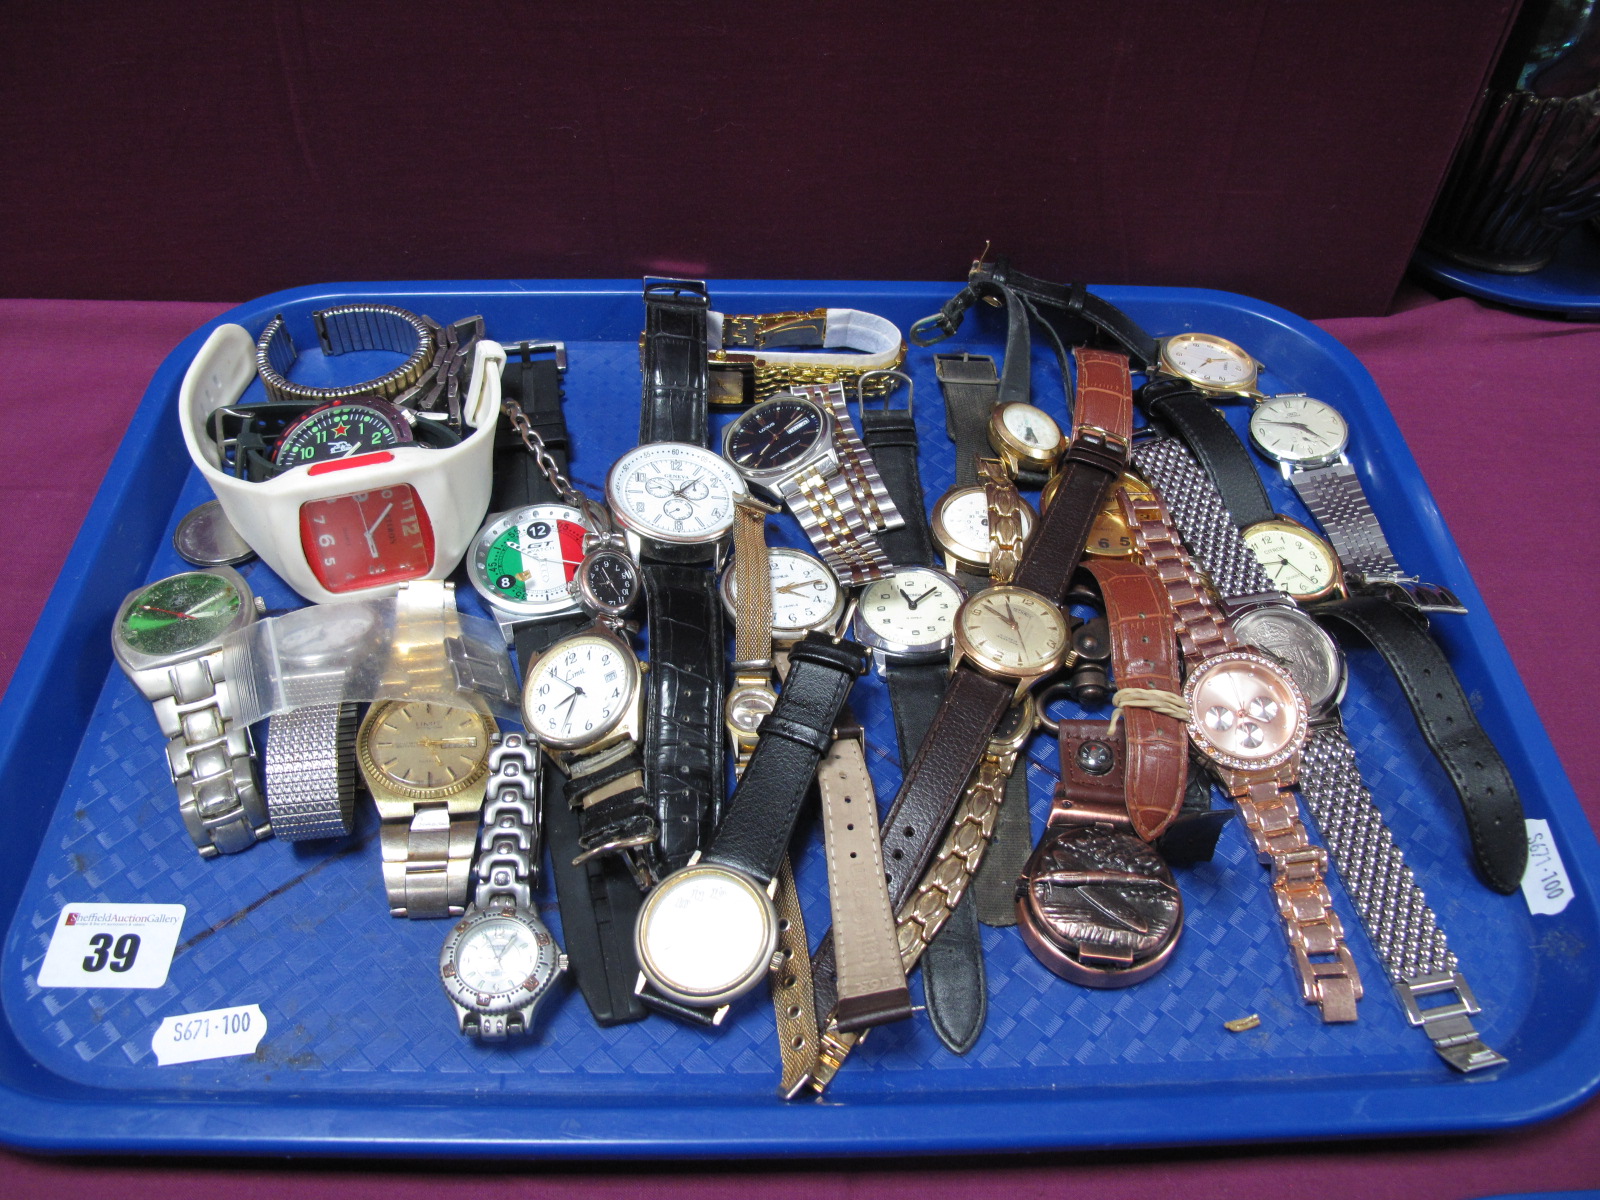 A Mixed Lot of Assorted ladies and Gent's Wristwatches, including Technos, Uno Sekonda, Citron,